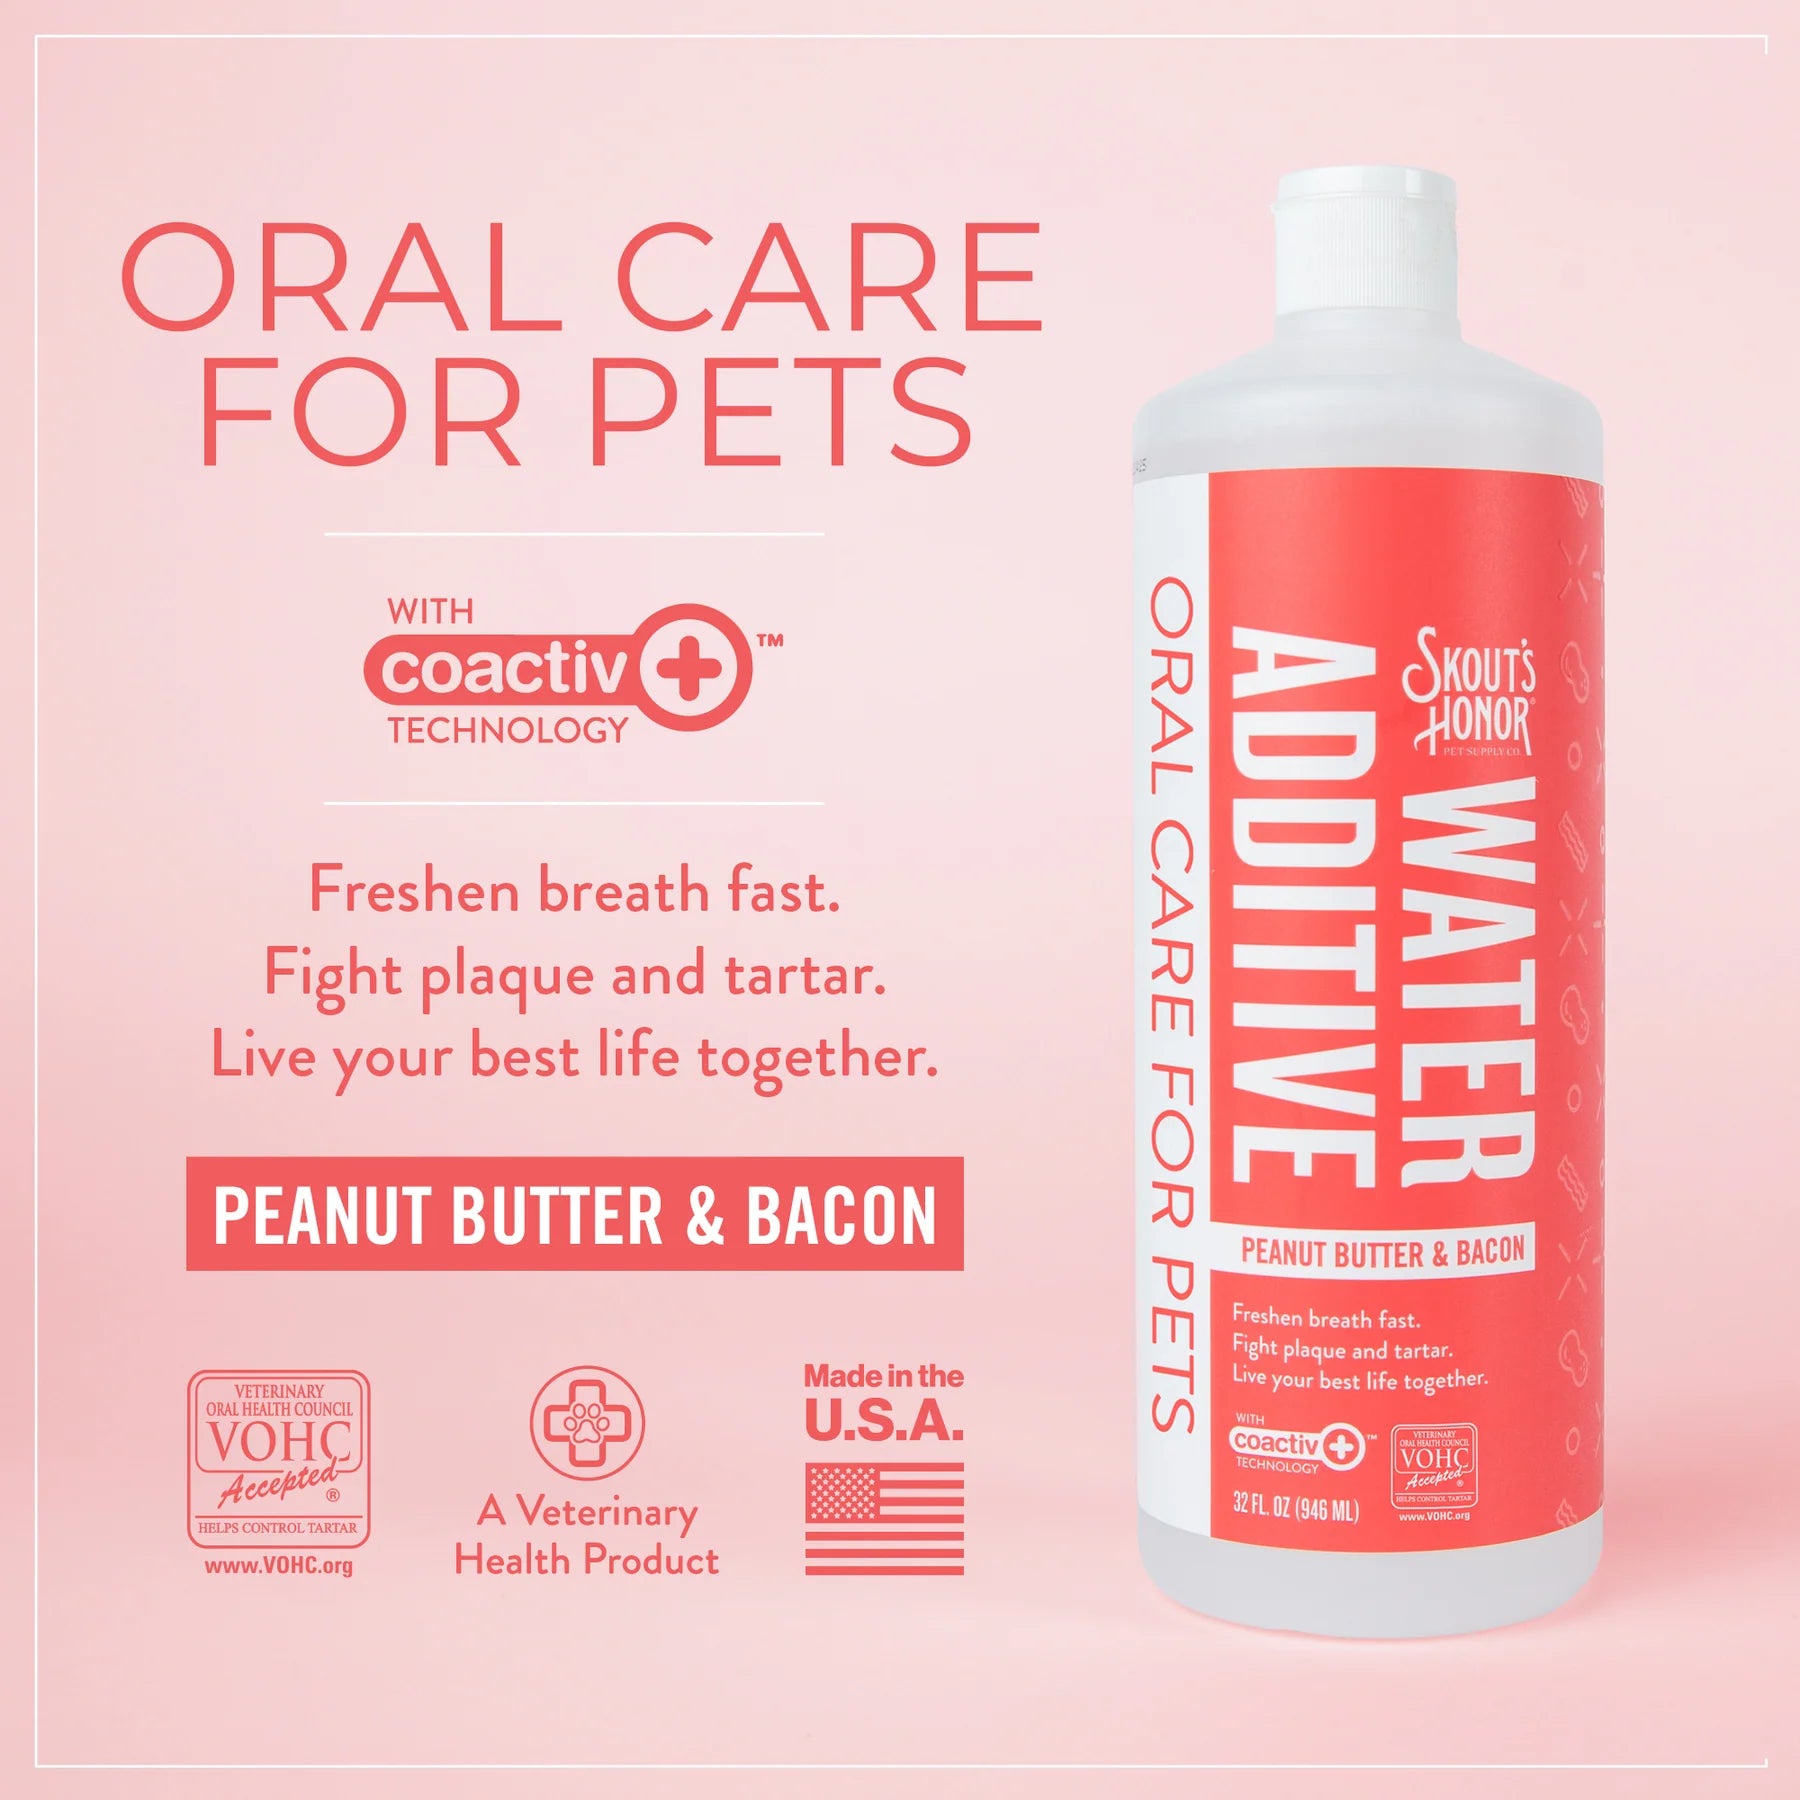 Skout's Honor Oral Care Water Additive - Peanut Butter & Bacon Flavor